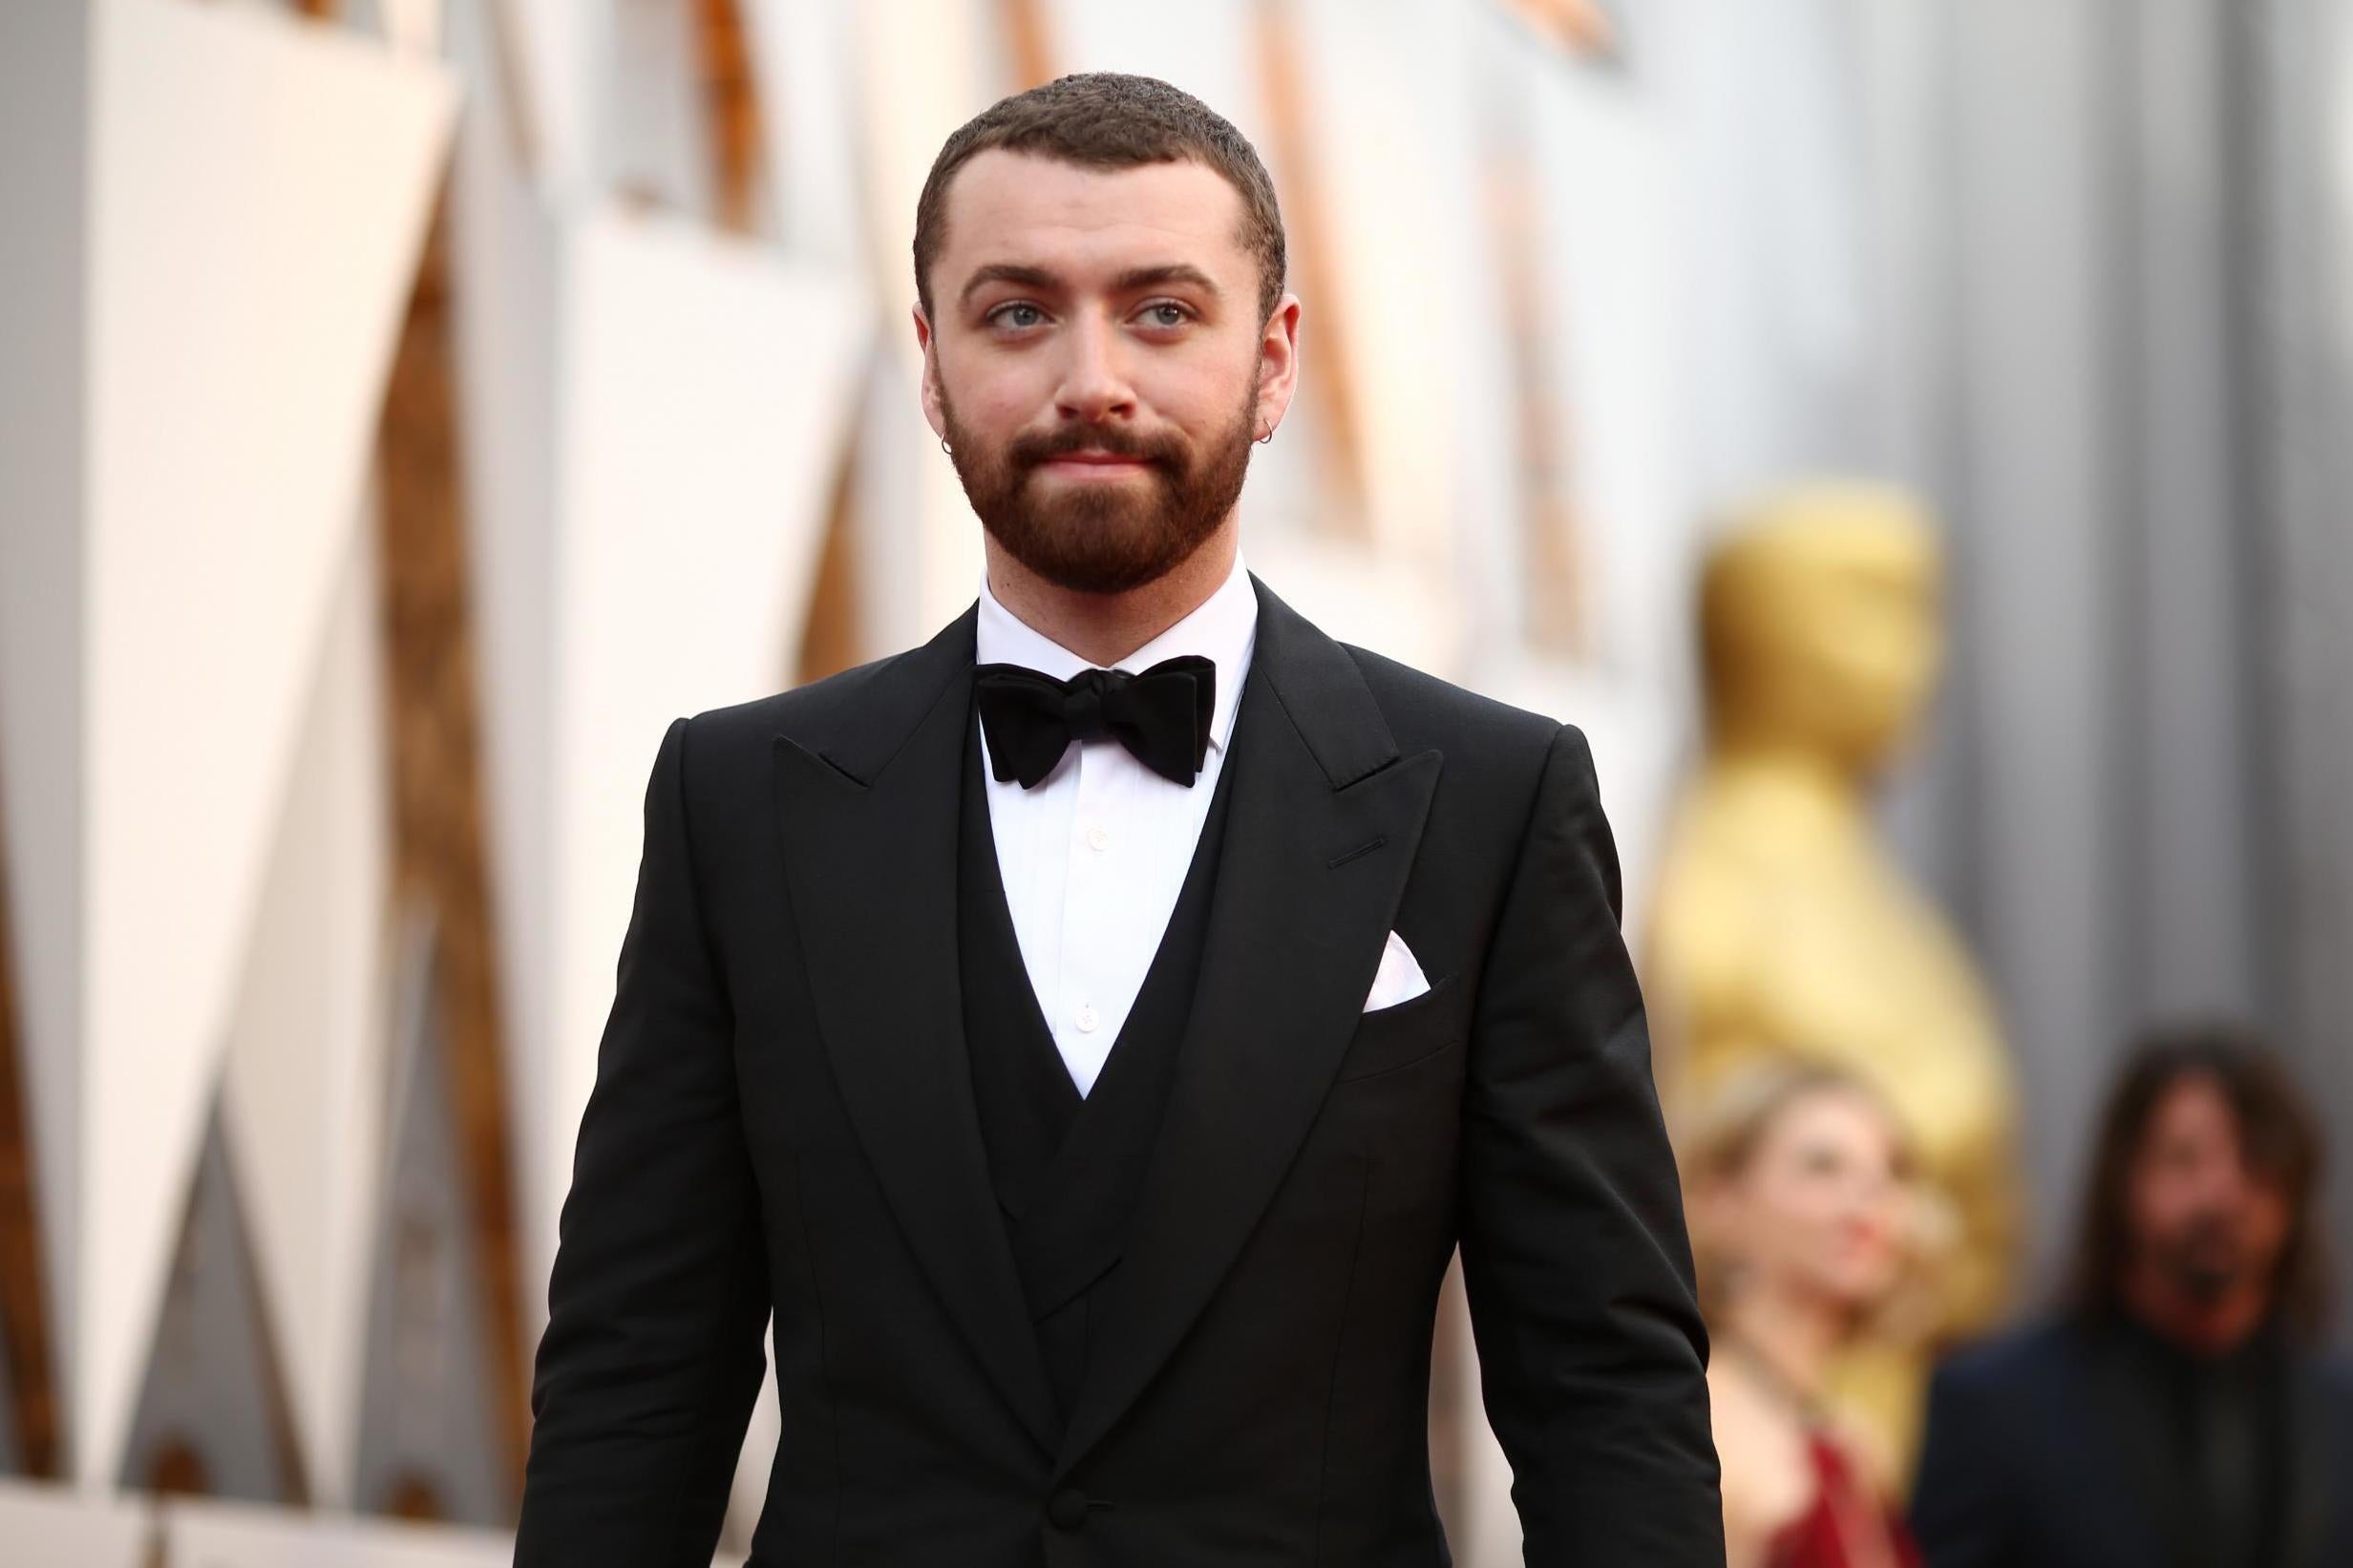 Sam Smith embraces body positivity with series of shirtless Instagram photos